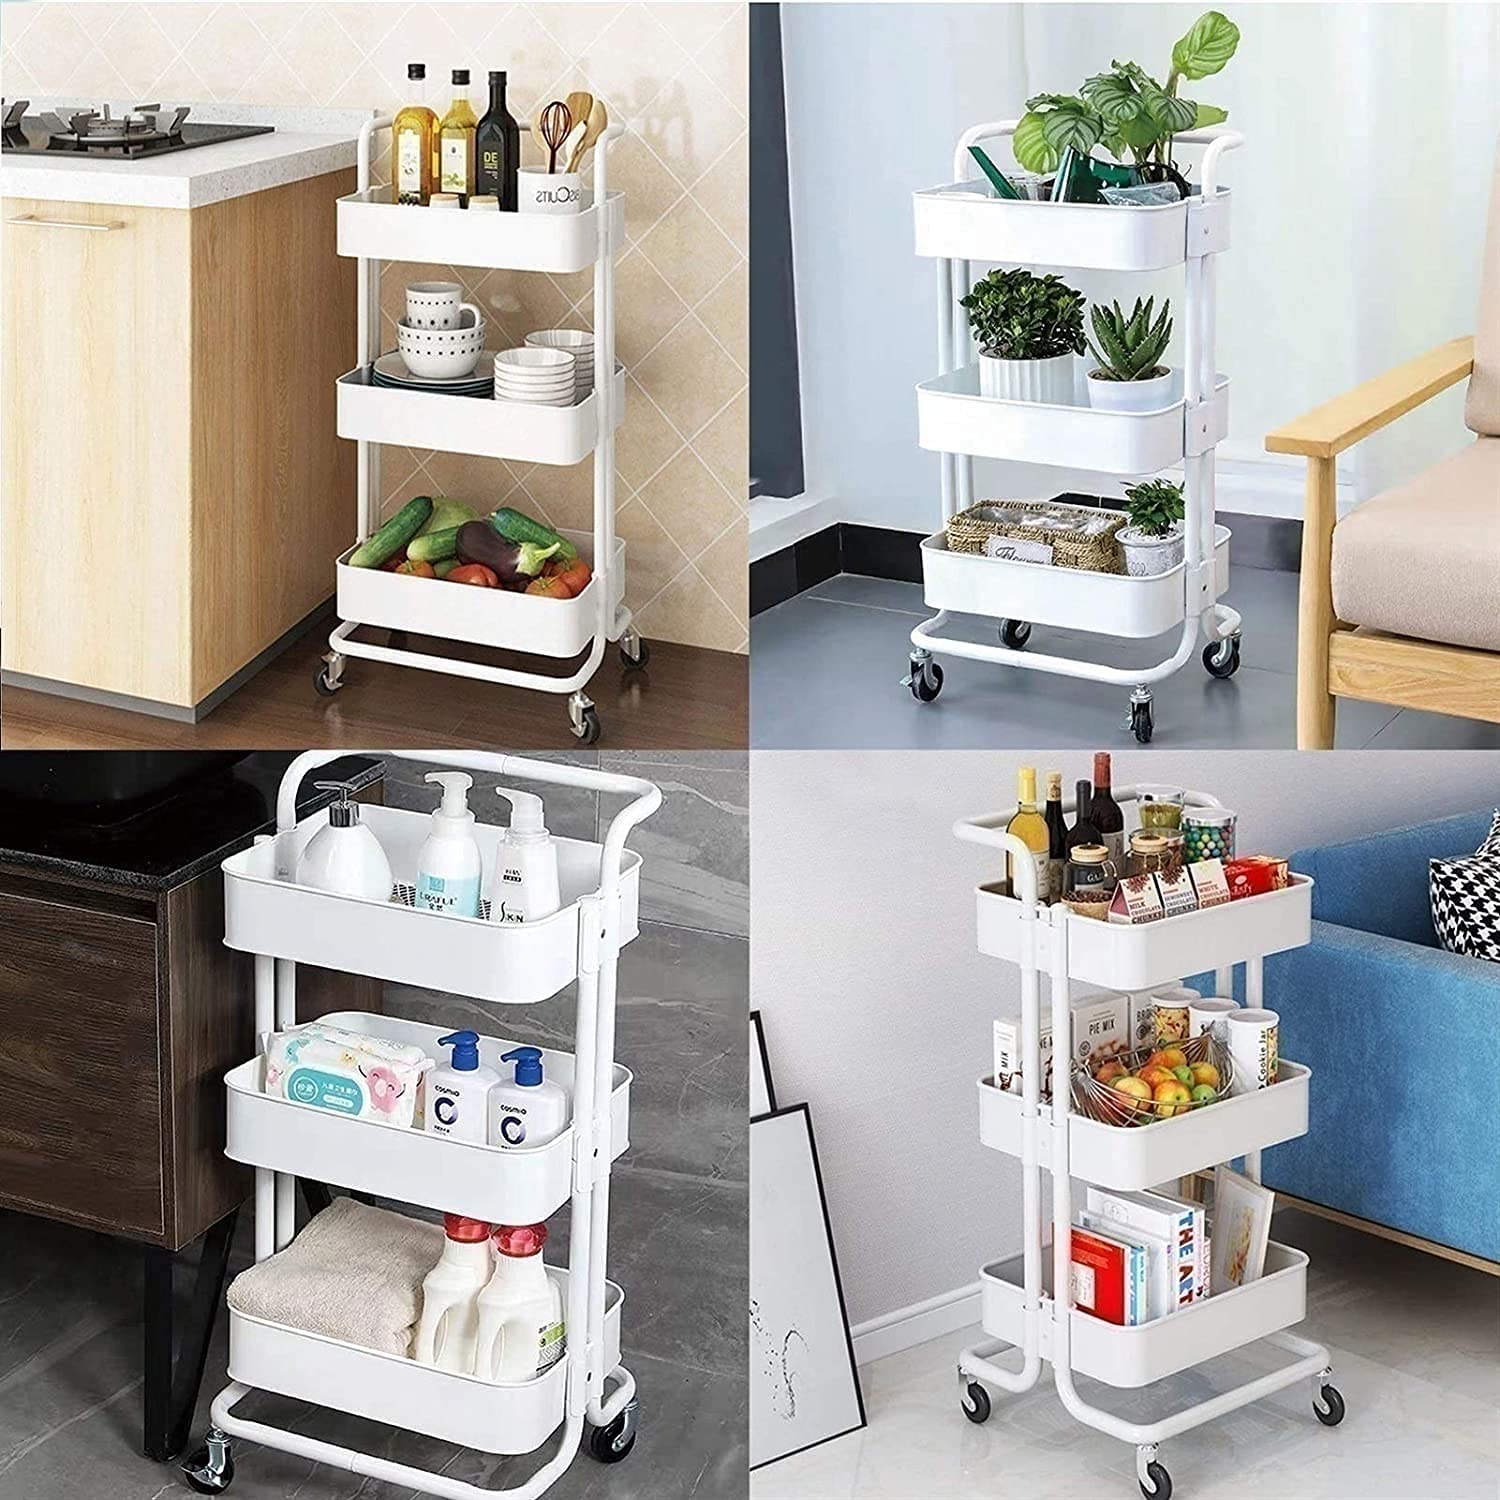 3-Tier Rolling Utility Carts Trolley Storage Cart with Handle Multifunctional Organization Cart with Brake Caster Wheels Kitchen Shelf Multifunctional Storage Rack with Net Basket Mass (White) Brand: